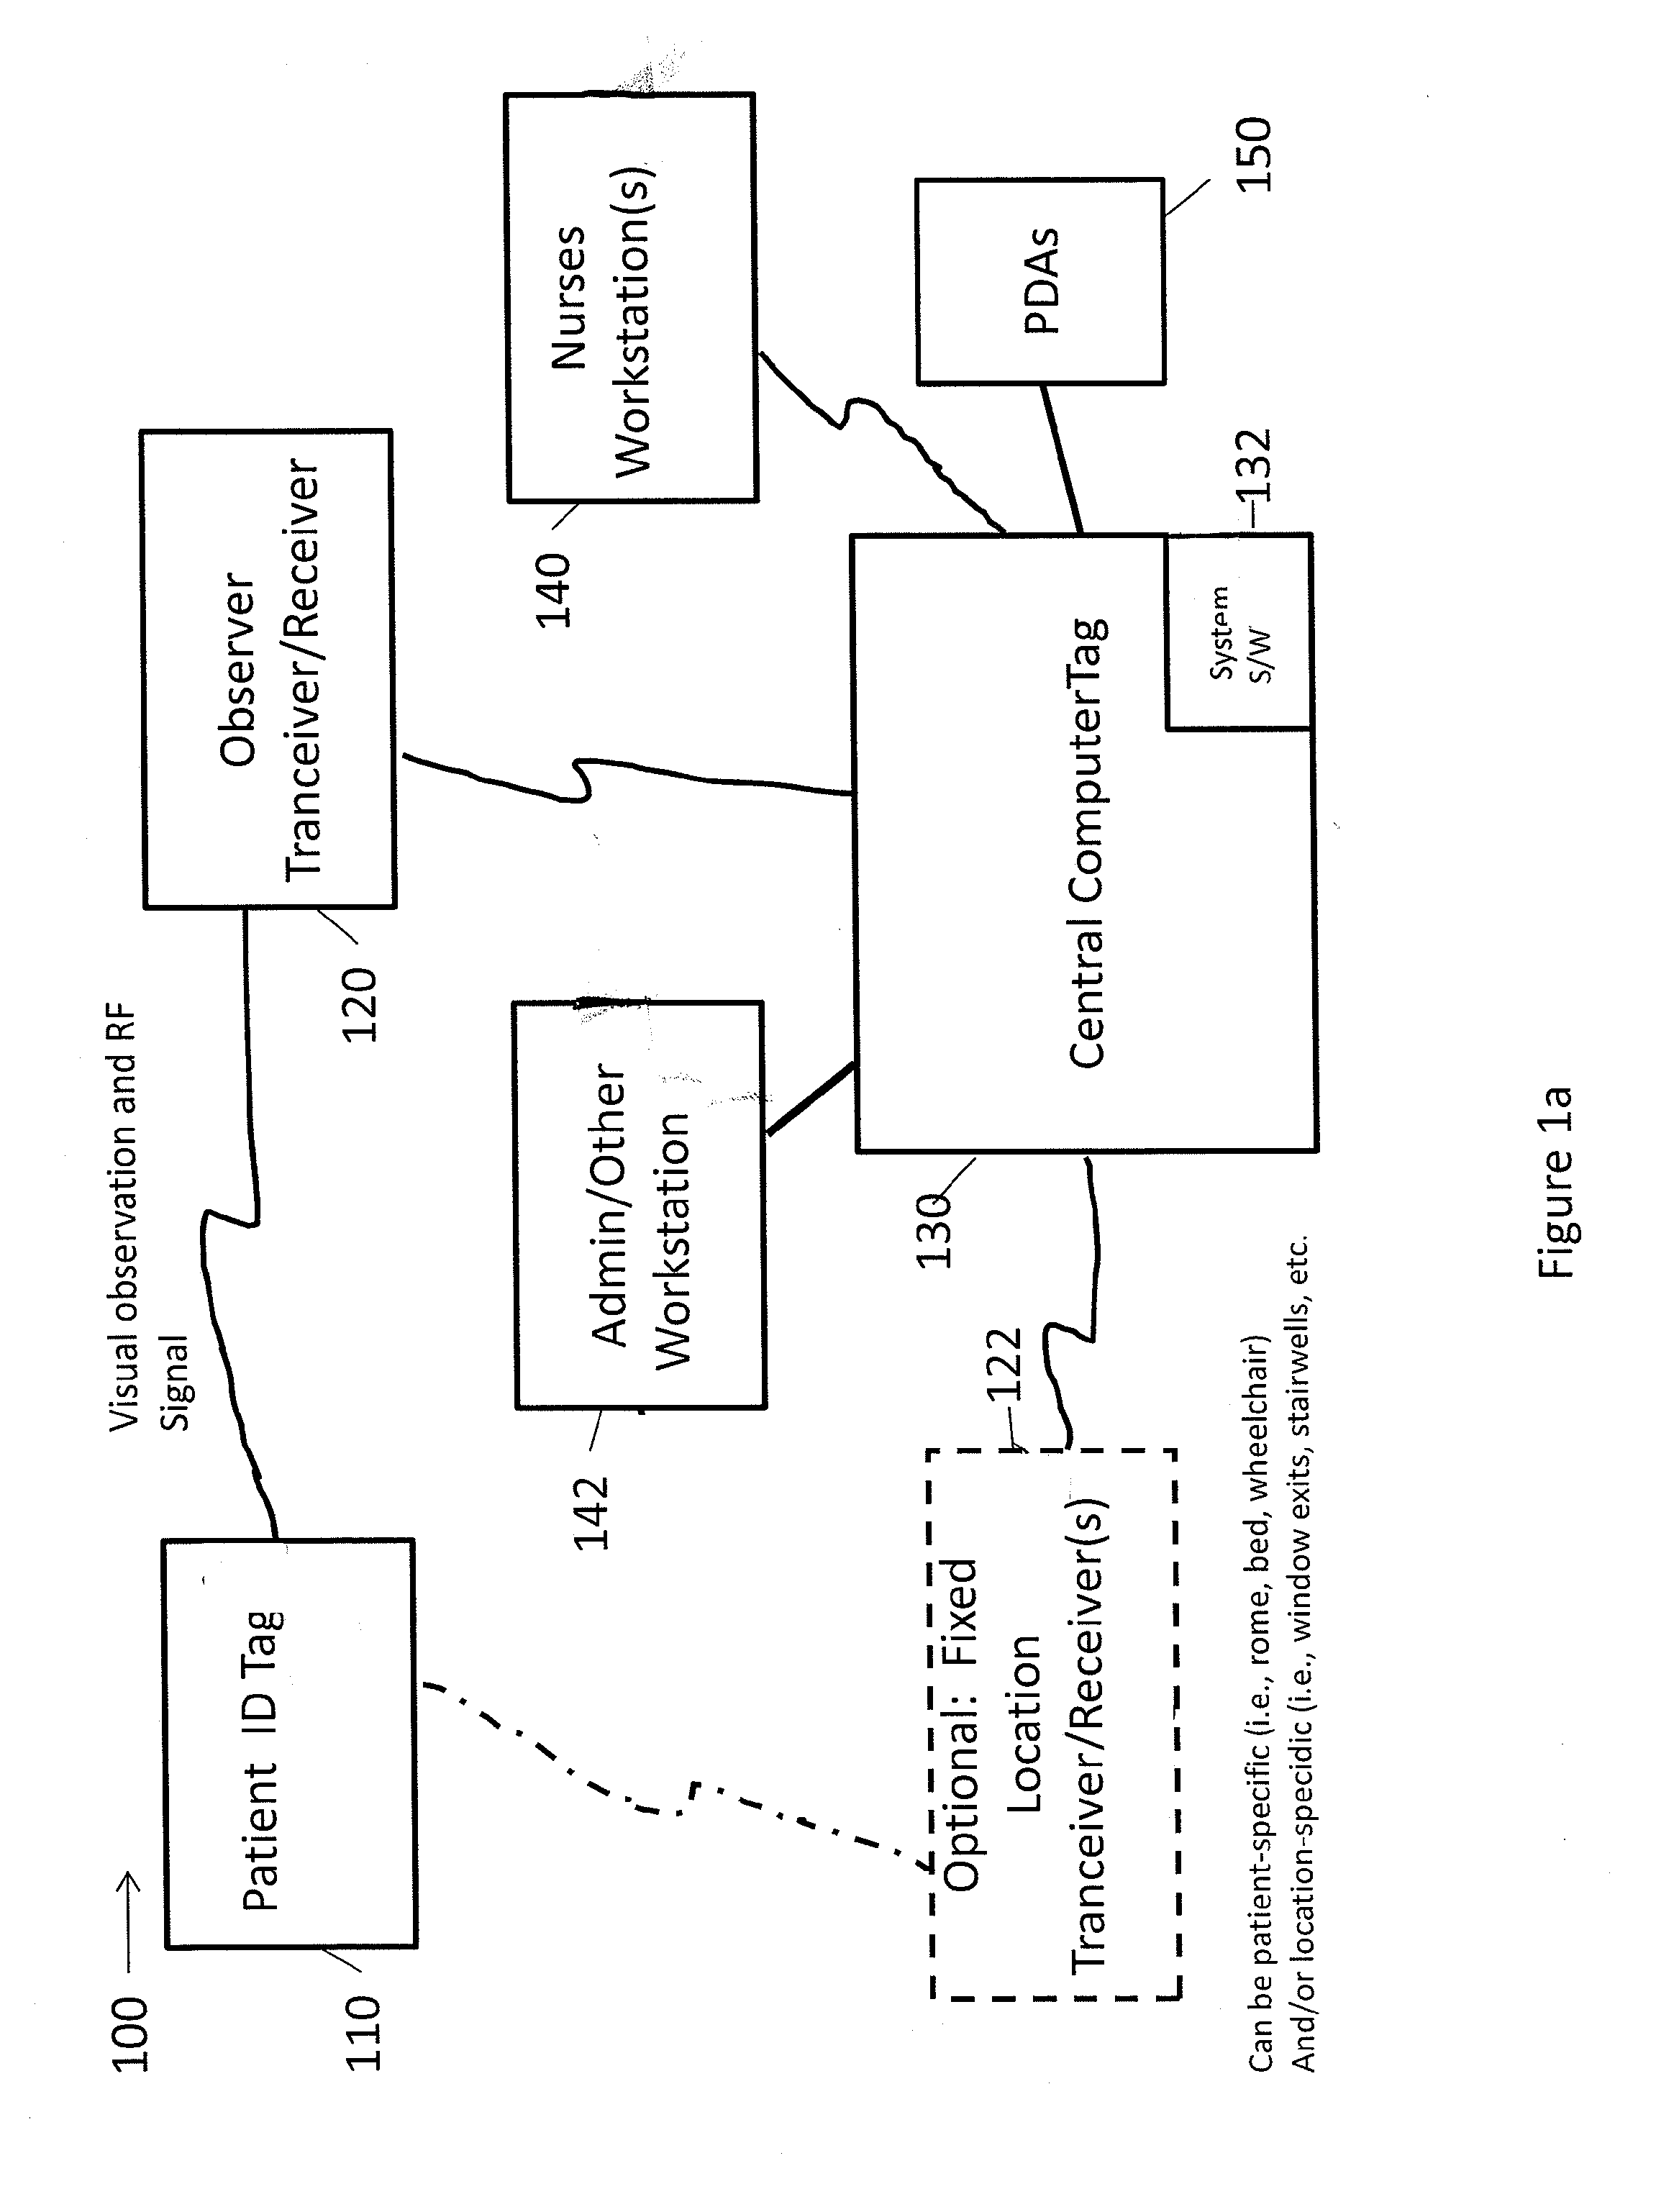 Electronic Patient Monitoring System and Method